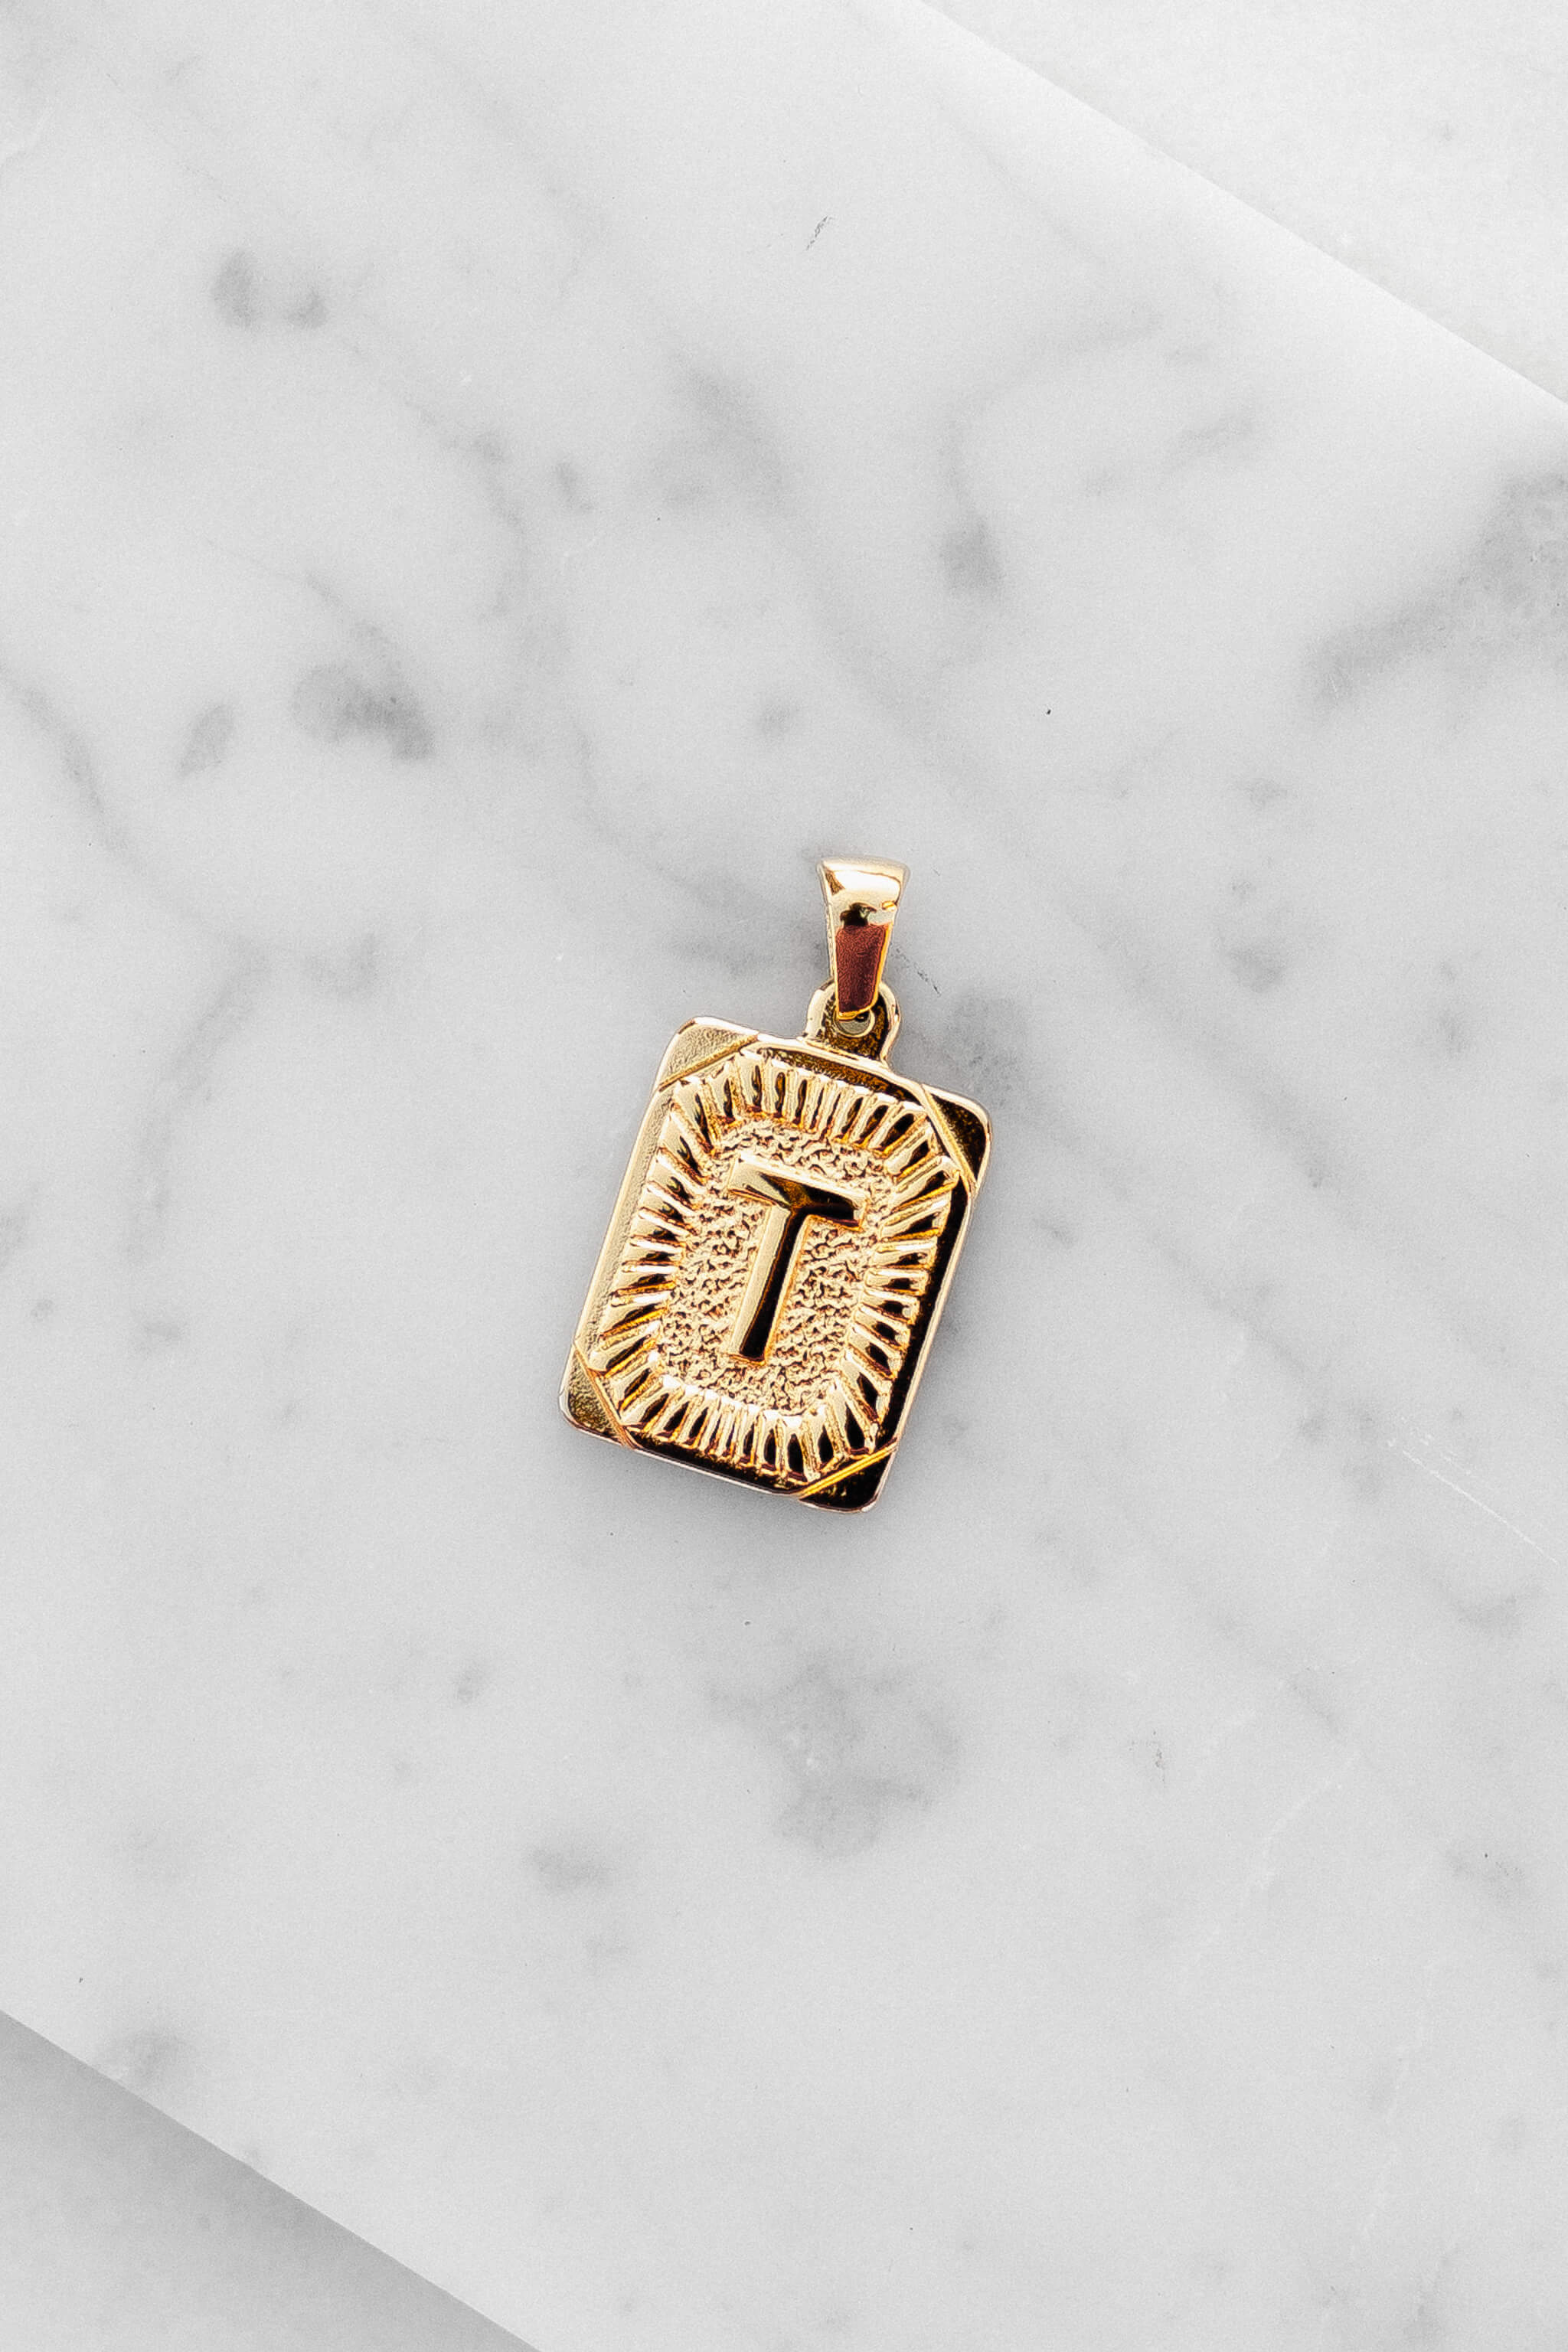 Gold Monogram Letter "T" Charm laying on a marble